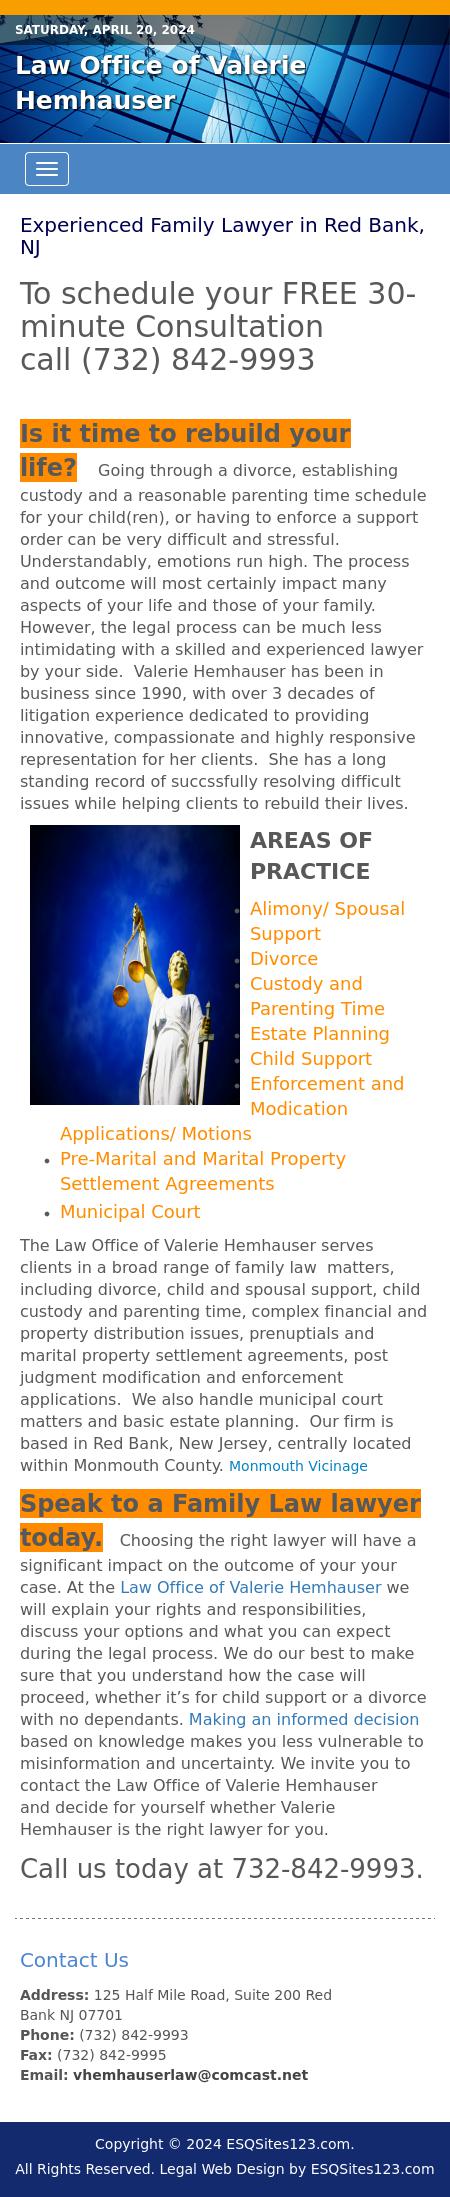 Law Office of Valerie Hemhauser - Red Bank NJ Lawyers